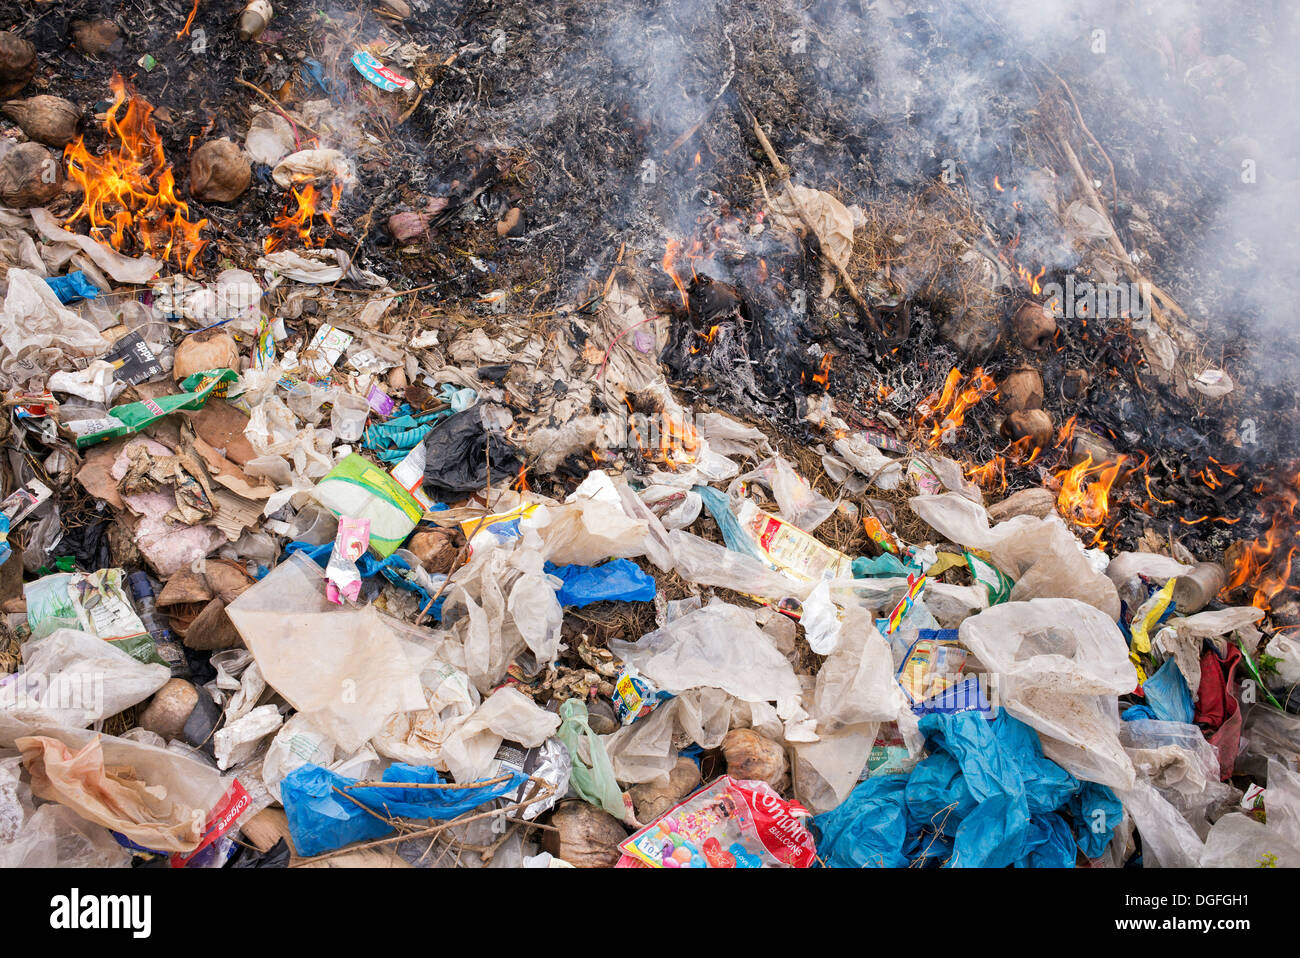 Burning plastic waste in the Indian countryside Stock Photo